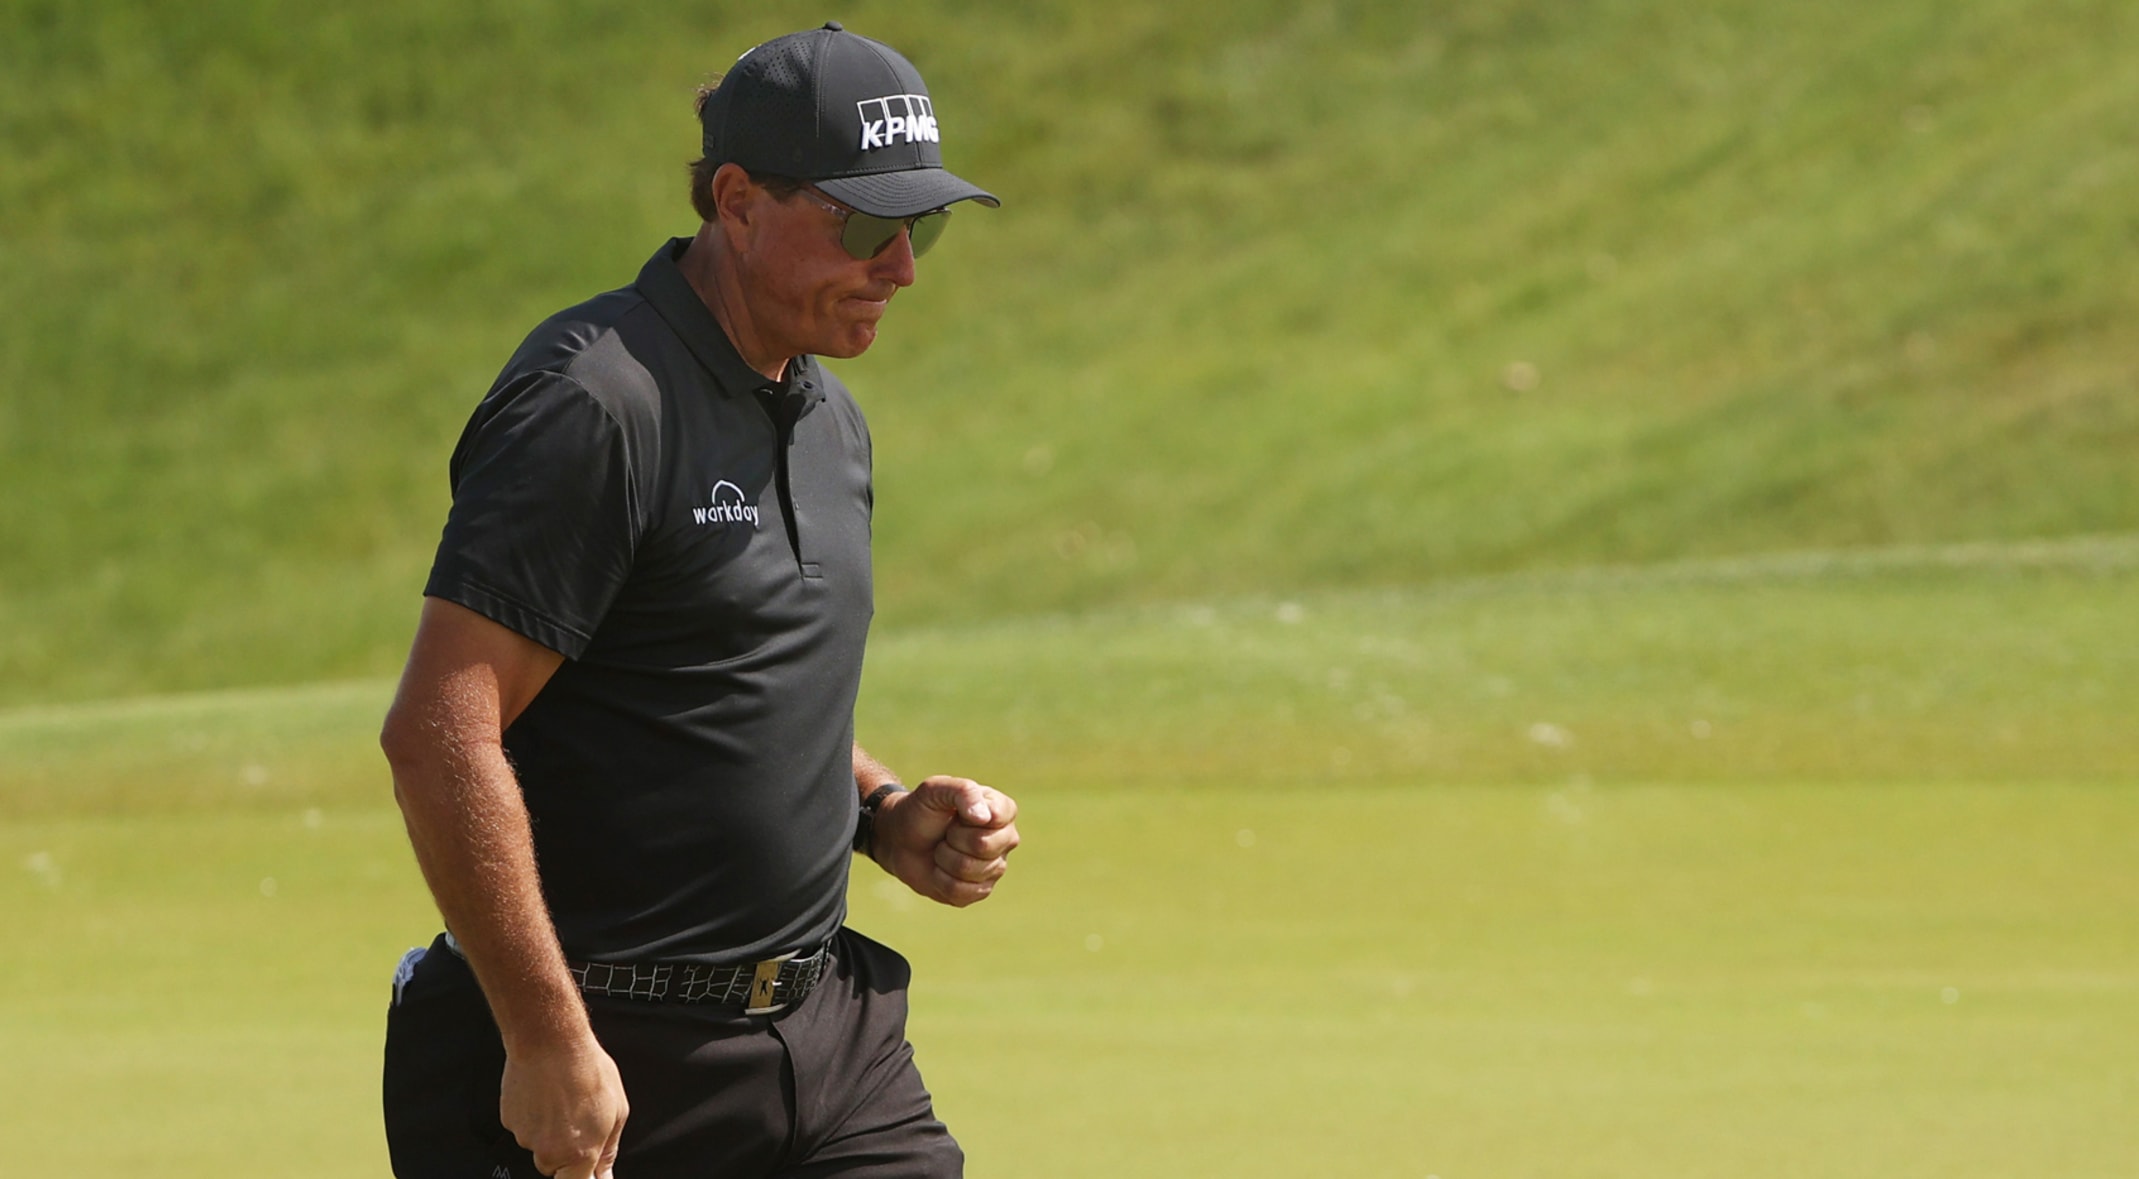 Phil Mickelson Shaky But Takes One Shot Lead At Pga Championship